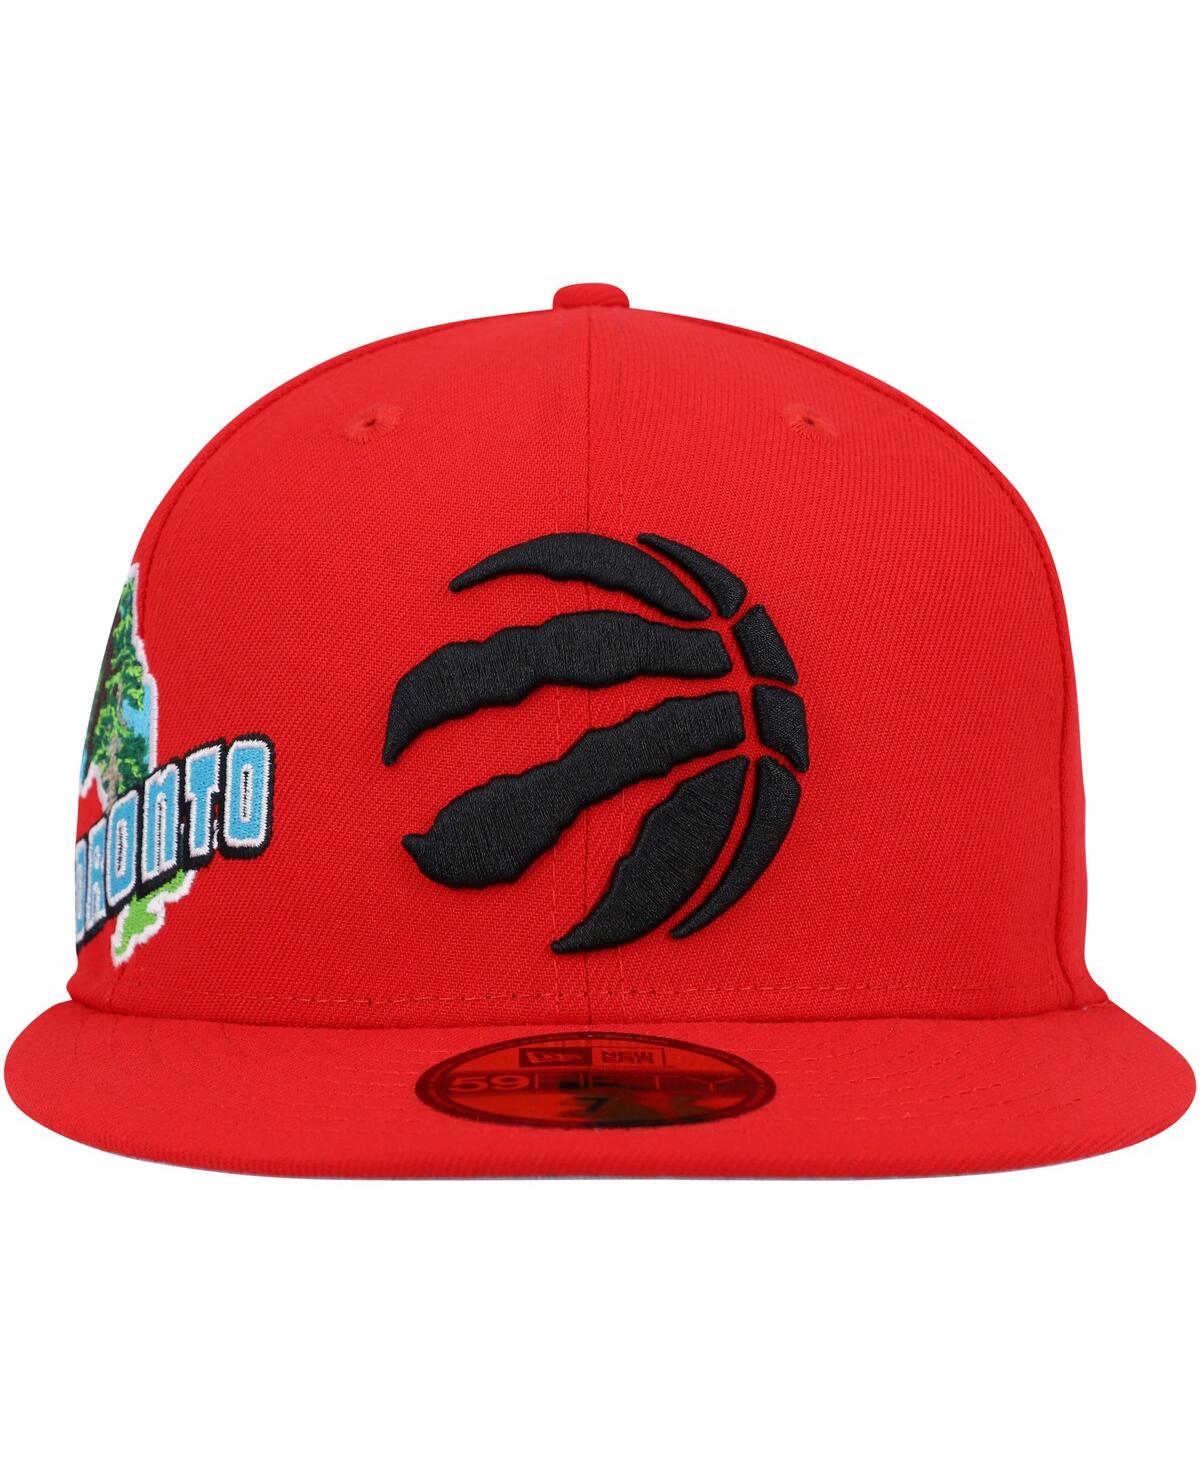 Shop New Era Men's  Red Toronto Raptors Stateview 59fifty Fitted Hat